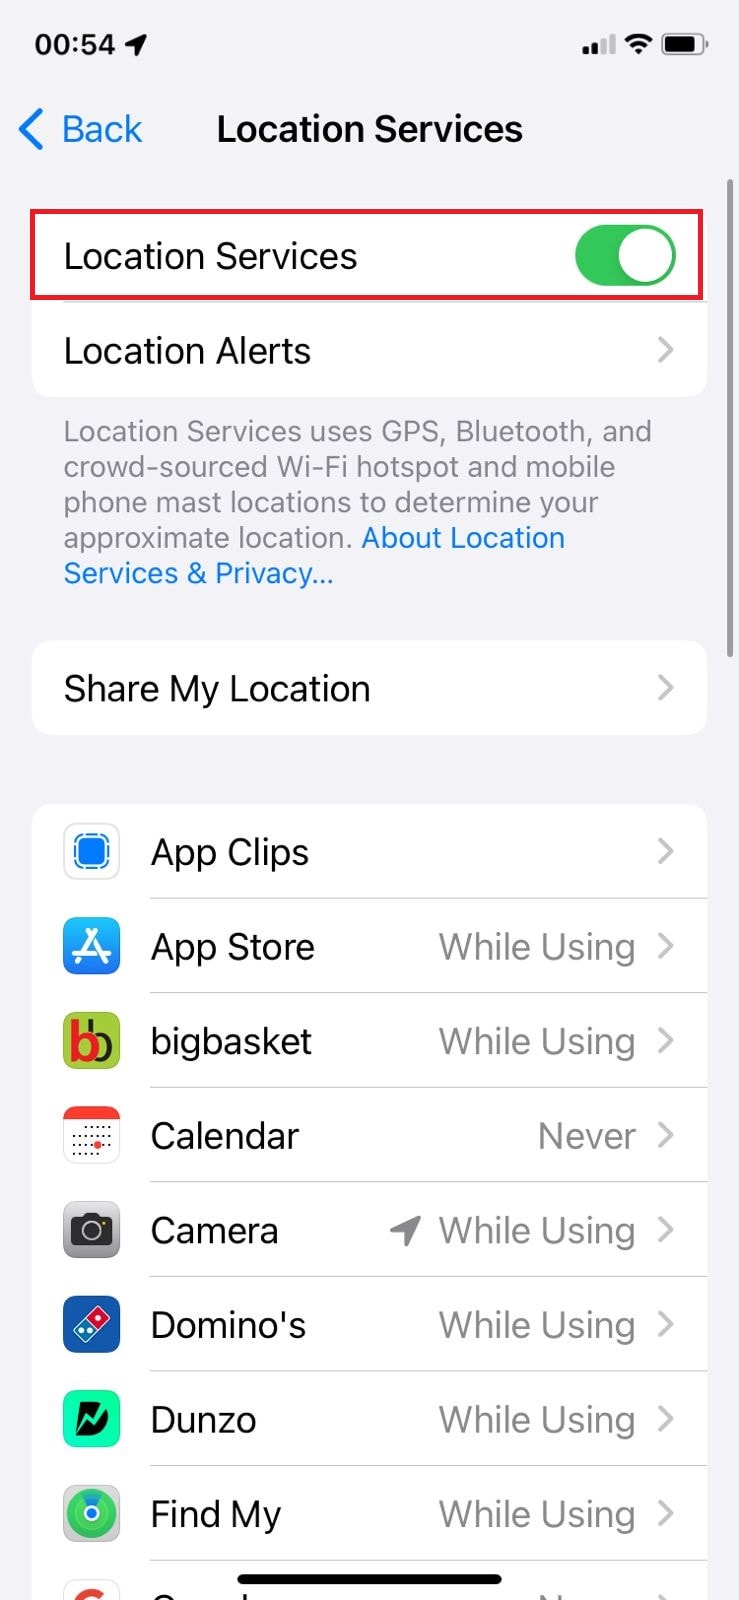 turn the toggle on for Location Services